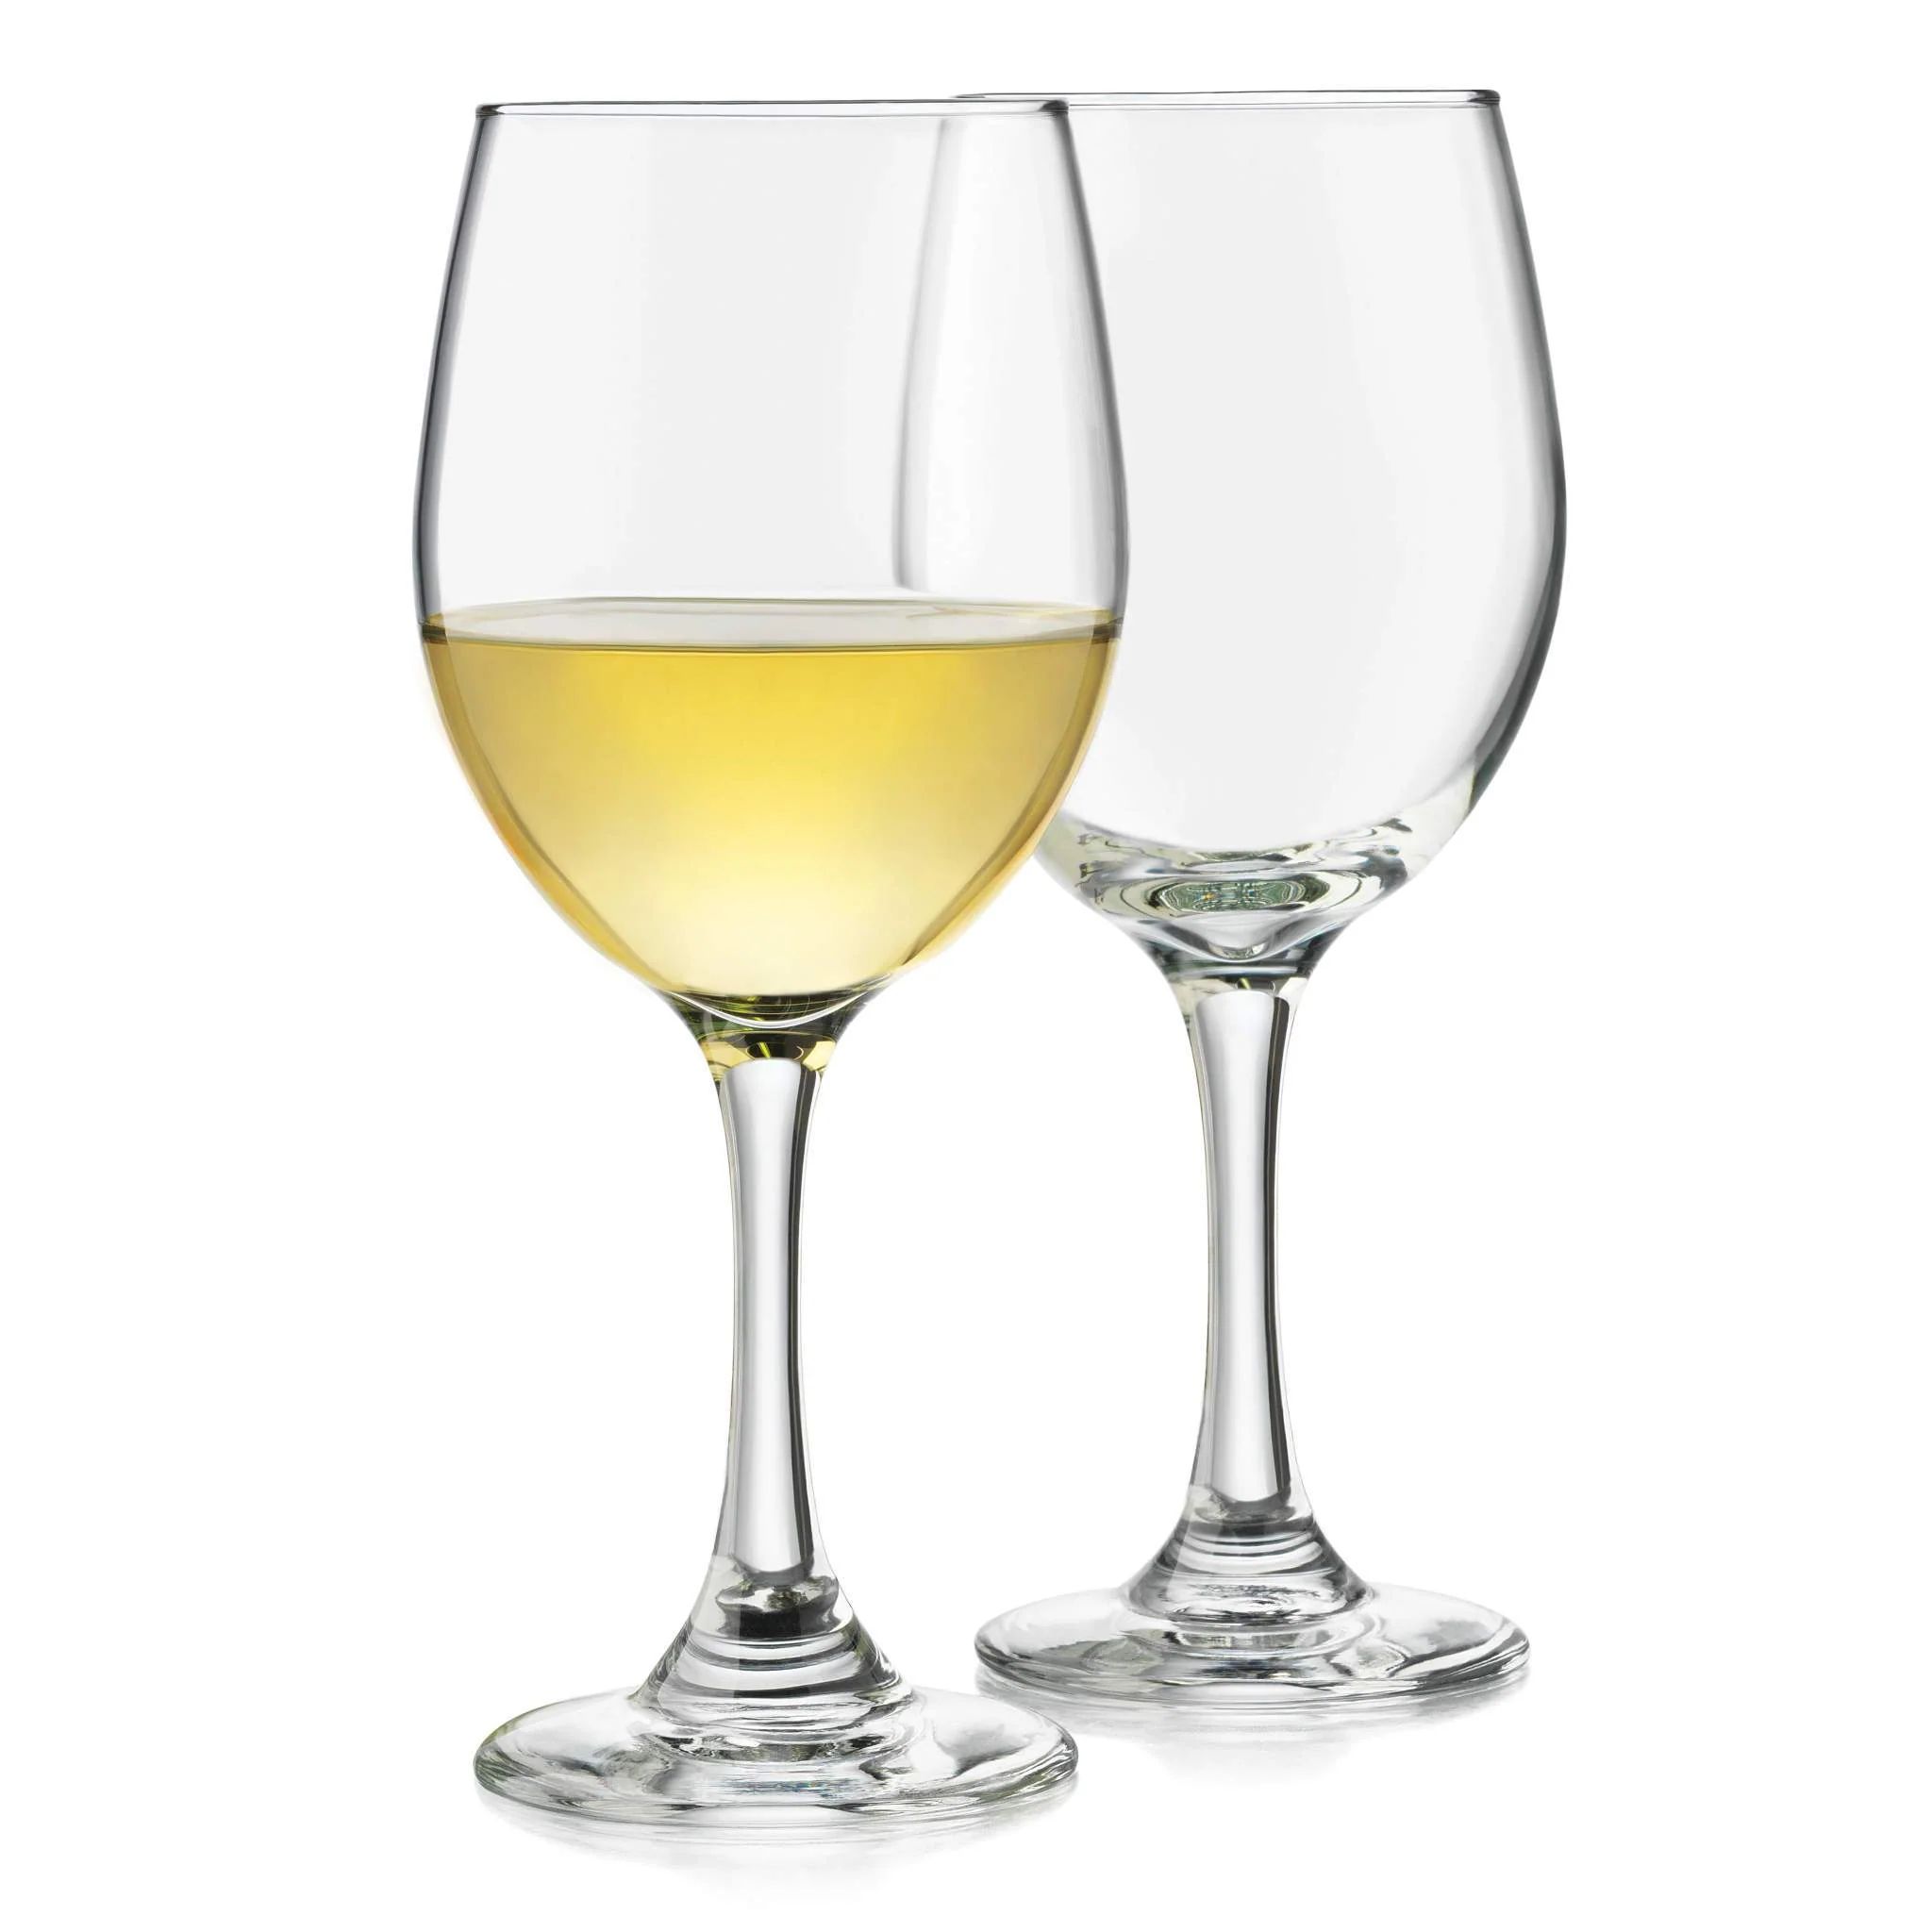 Libbey Classic White Wine Glasses, 14-ounce, Set of 4 | Libbey Glass